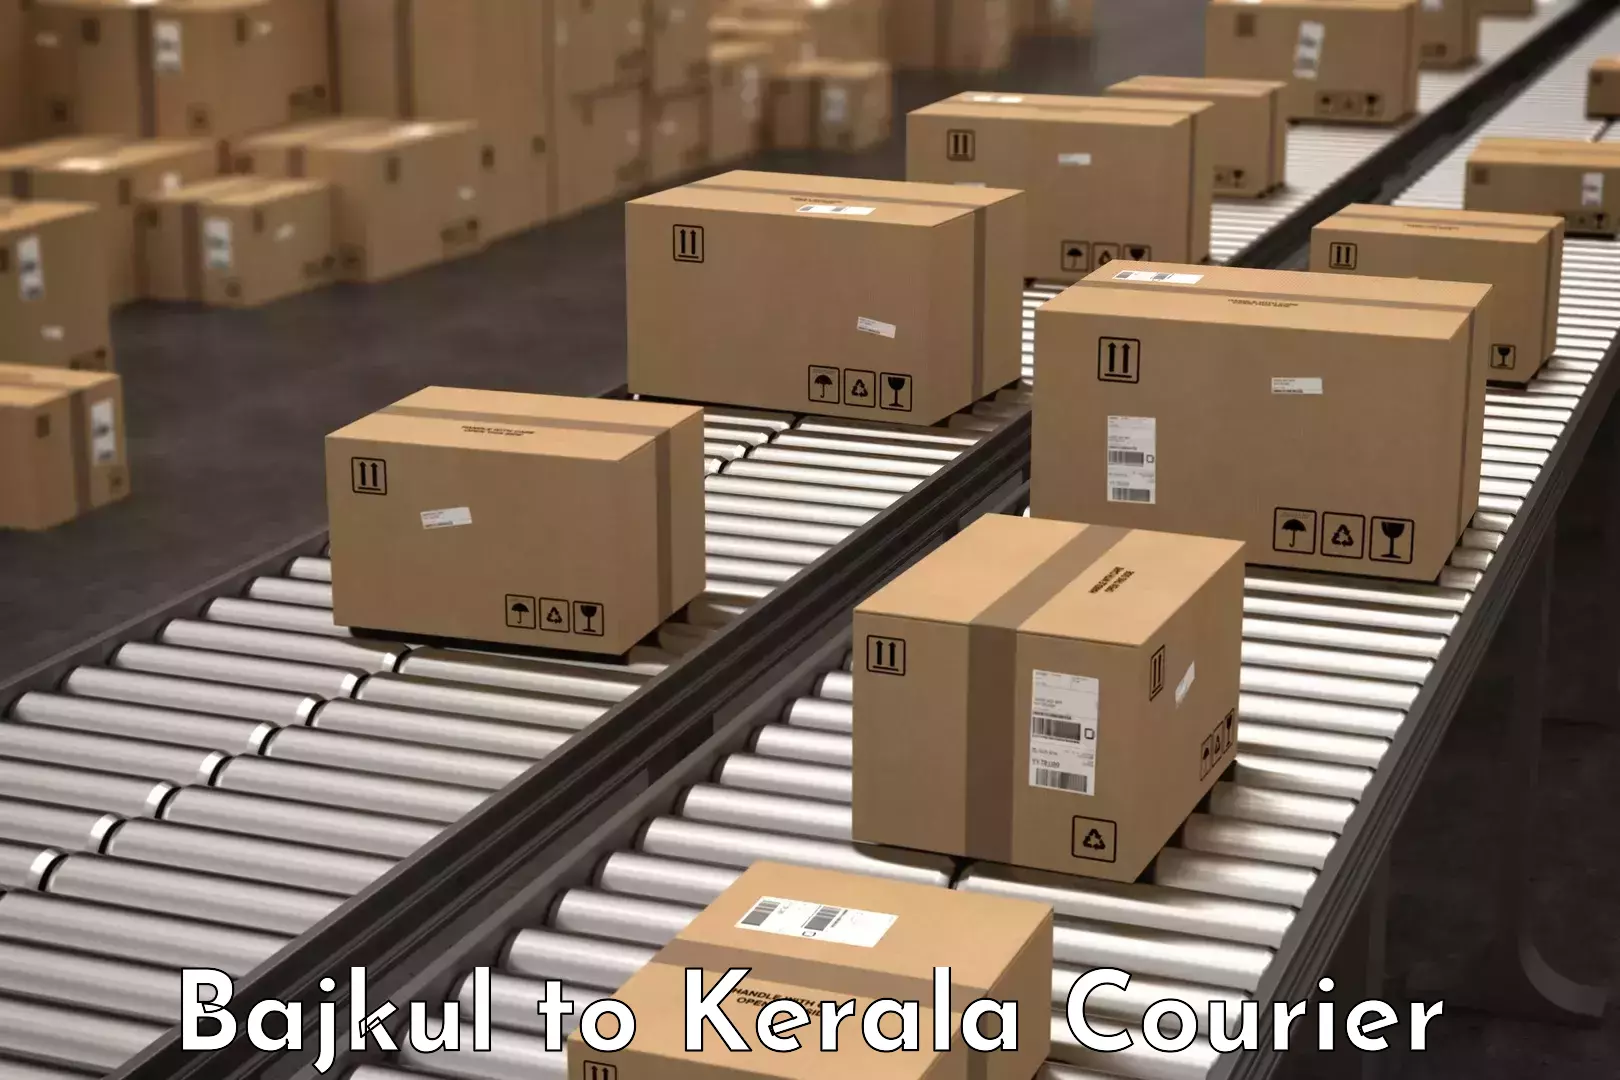 Moving and storage services Bajkul to Kerala